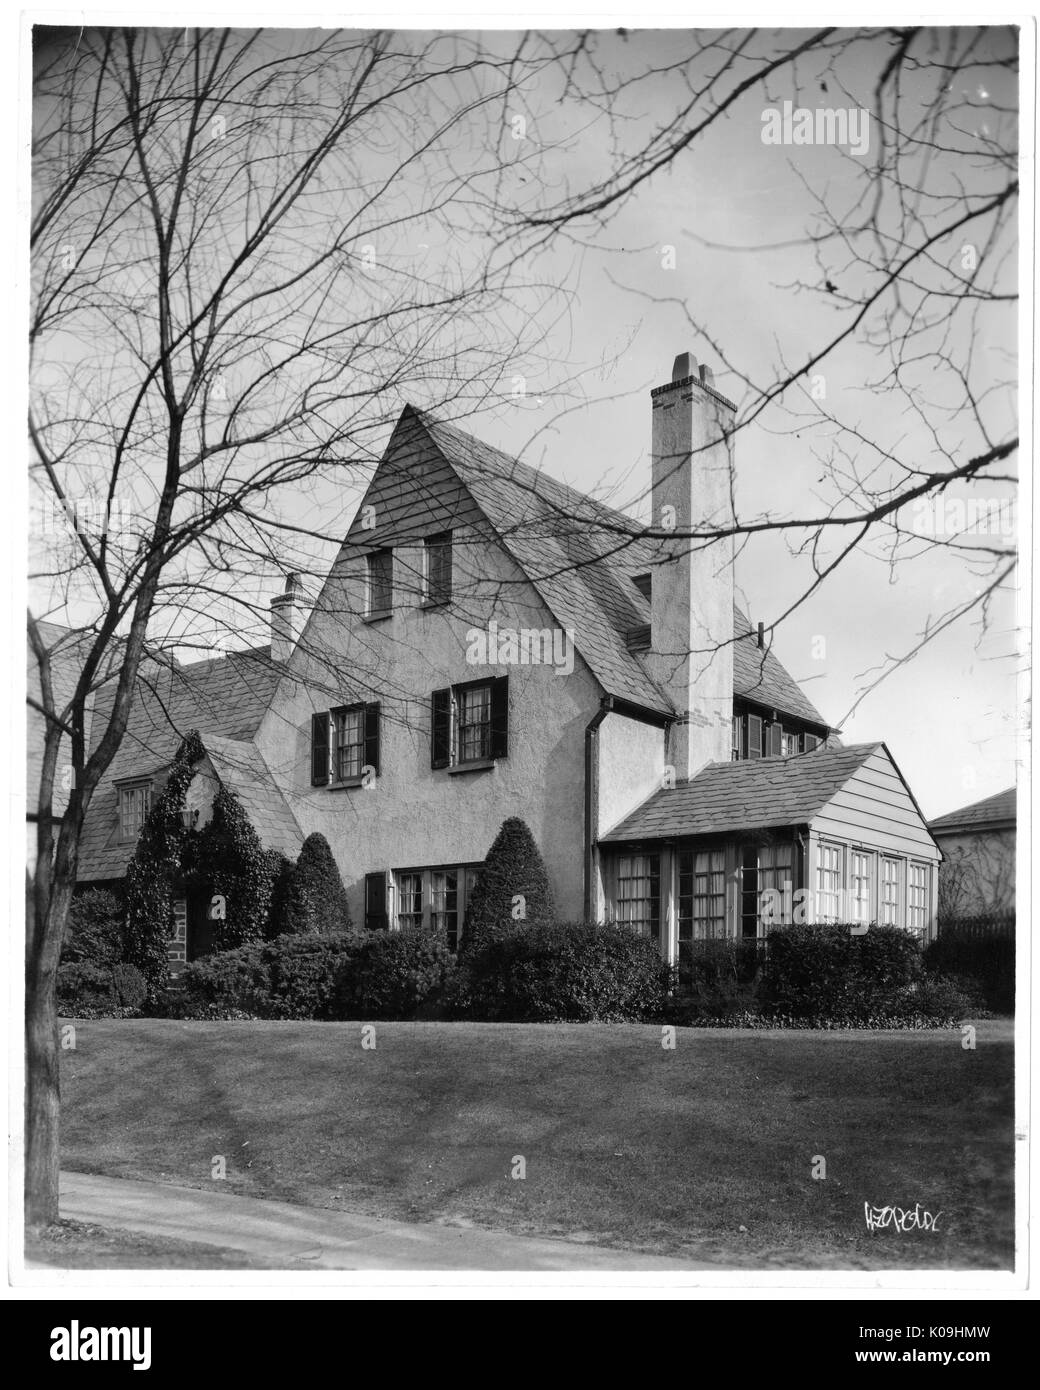 Photograph of a three-story home in Guilford neighborhood in Baltimore, with a cleanly cut grass and shapely bushes in front of the home with angular roofs and a plain facade with no use of bricks, Baltimore, Maryland, 1935. This image is from a series documenting the construction and sale of homes in the Roland Park/Guilford neighborhood of Baltimore, a streetcar suburb and one of the first planned communities in the United States. The neighborhood was segregated, and is considered an early example of the enforcement of racial segregation through the use of restricted covenants. Stock Photo